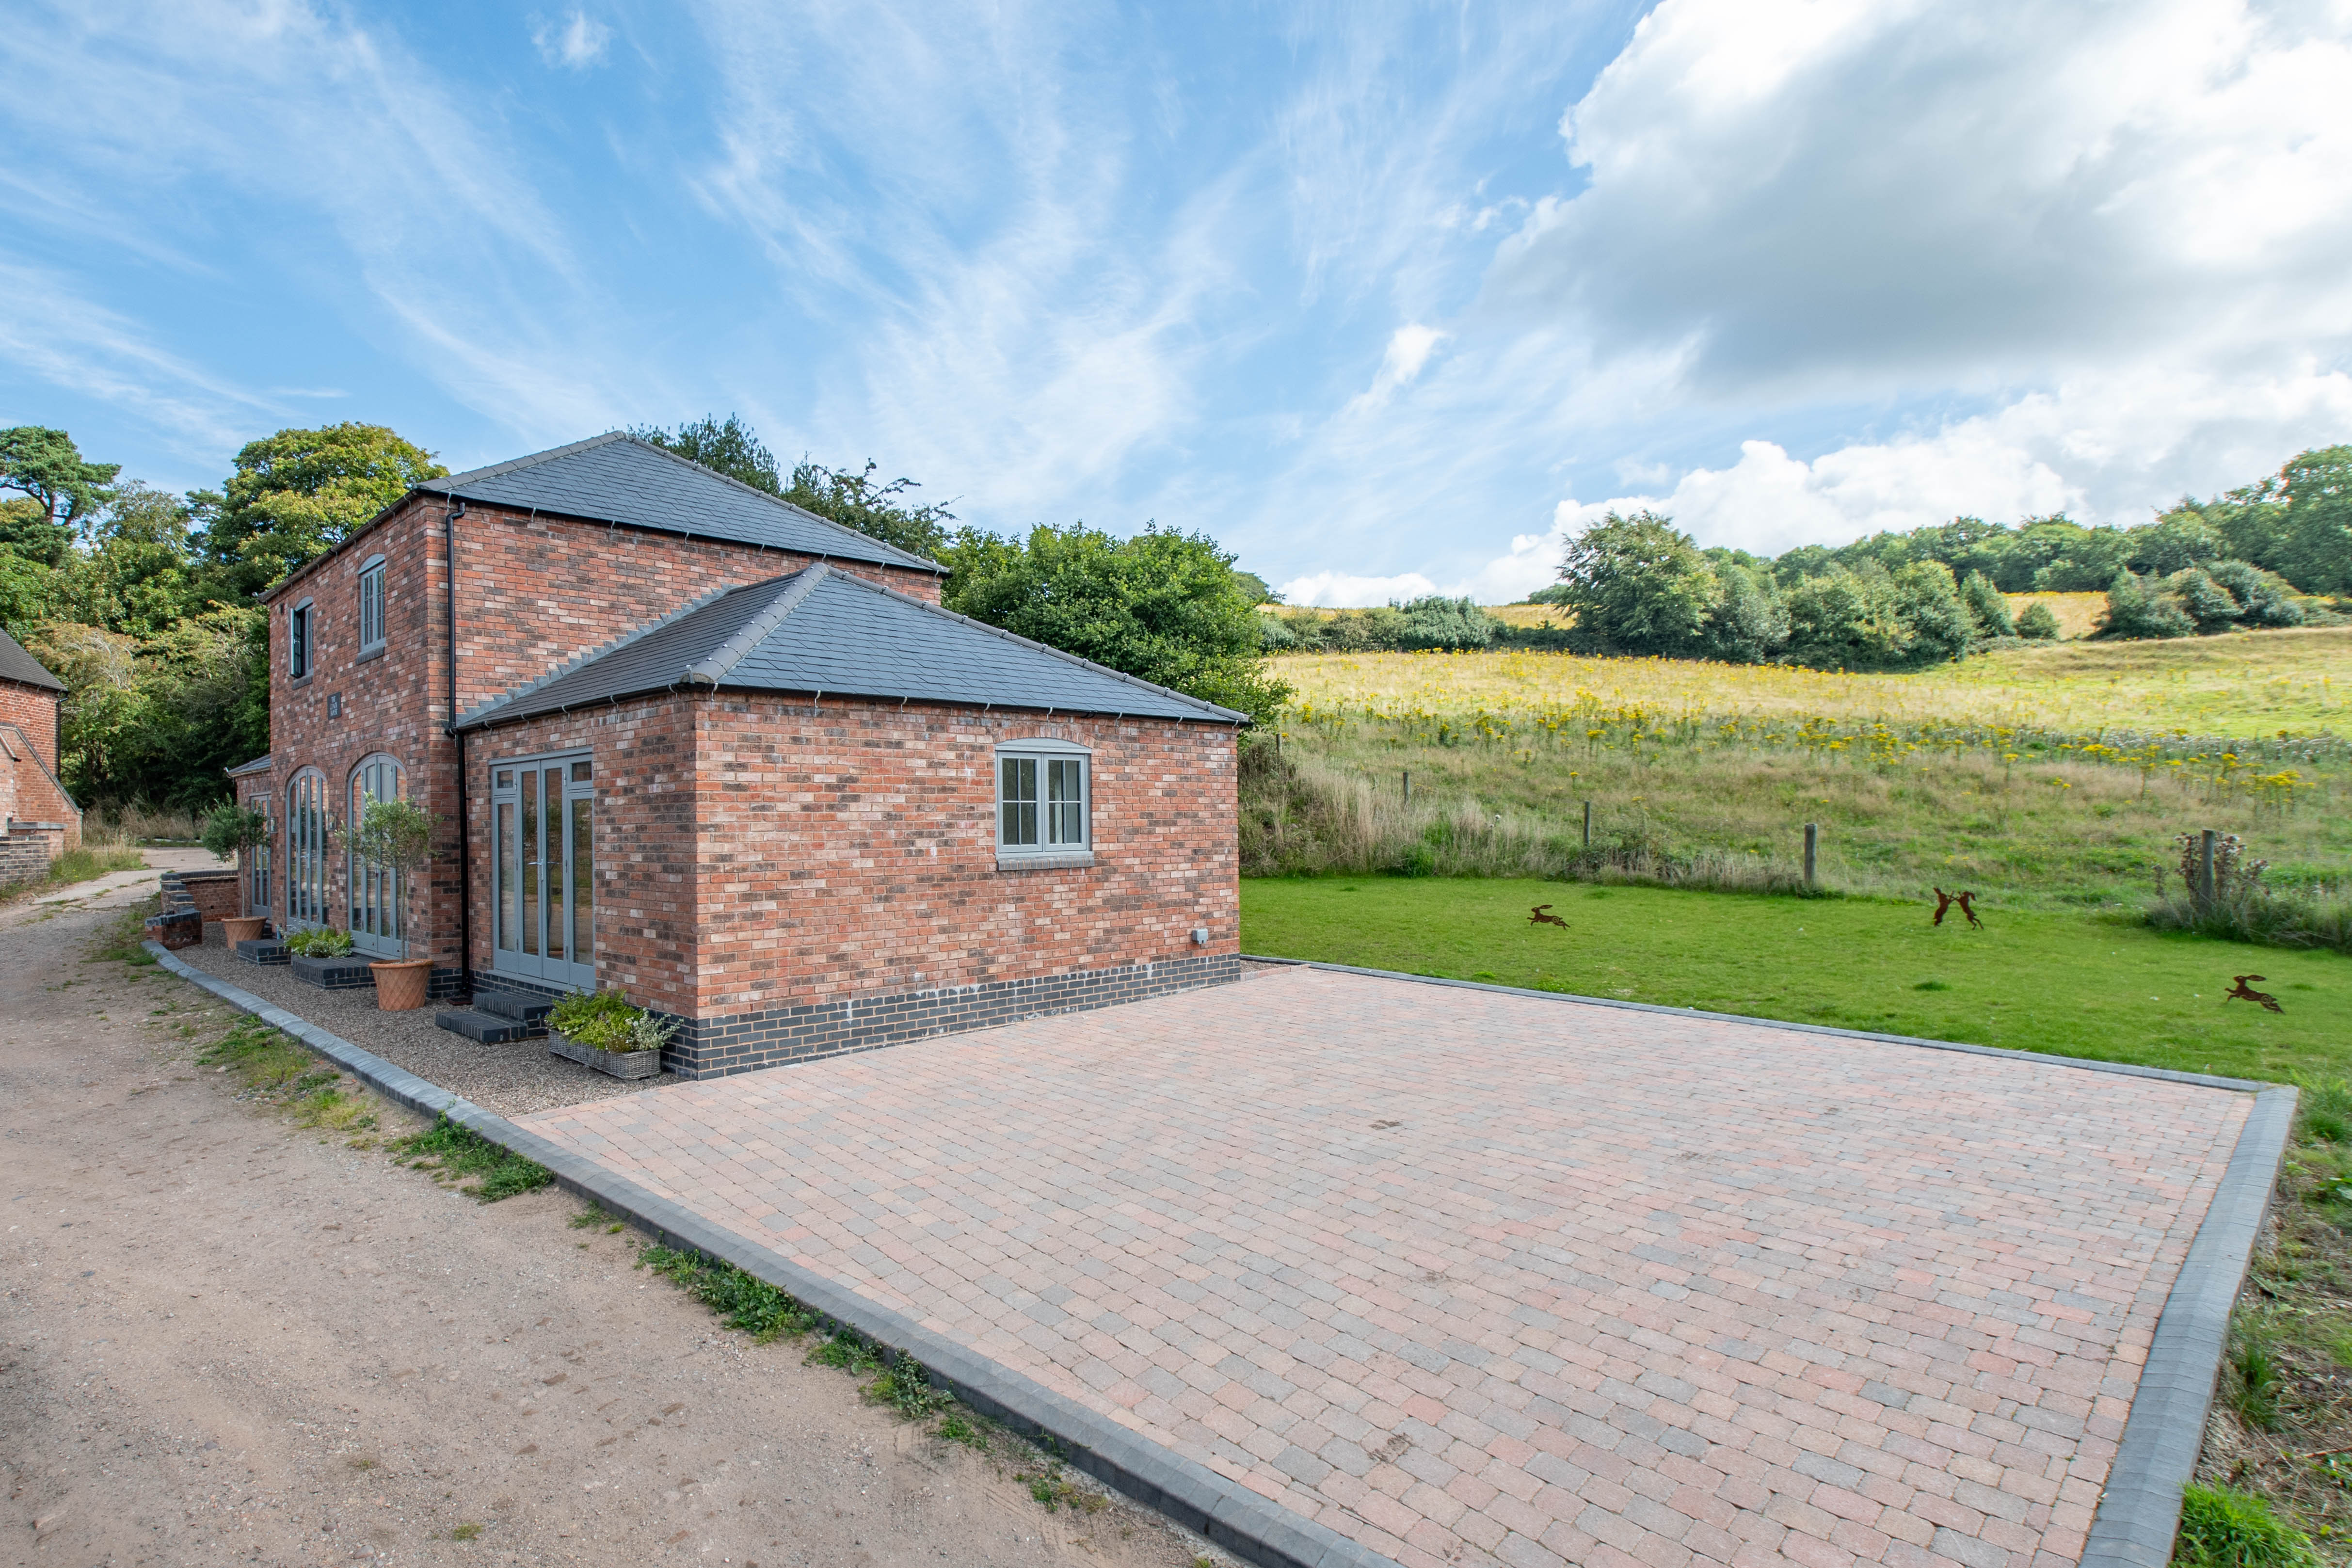 3 bed  for sale in Chadwich Grange, Bromsgrove  - Property Image 16